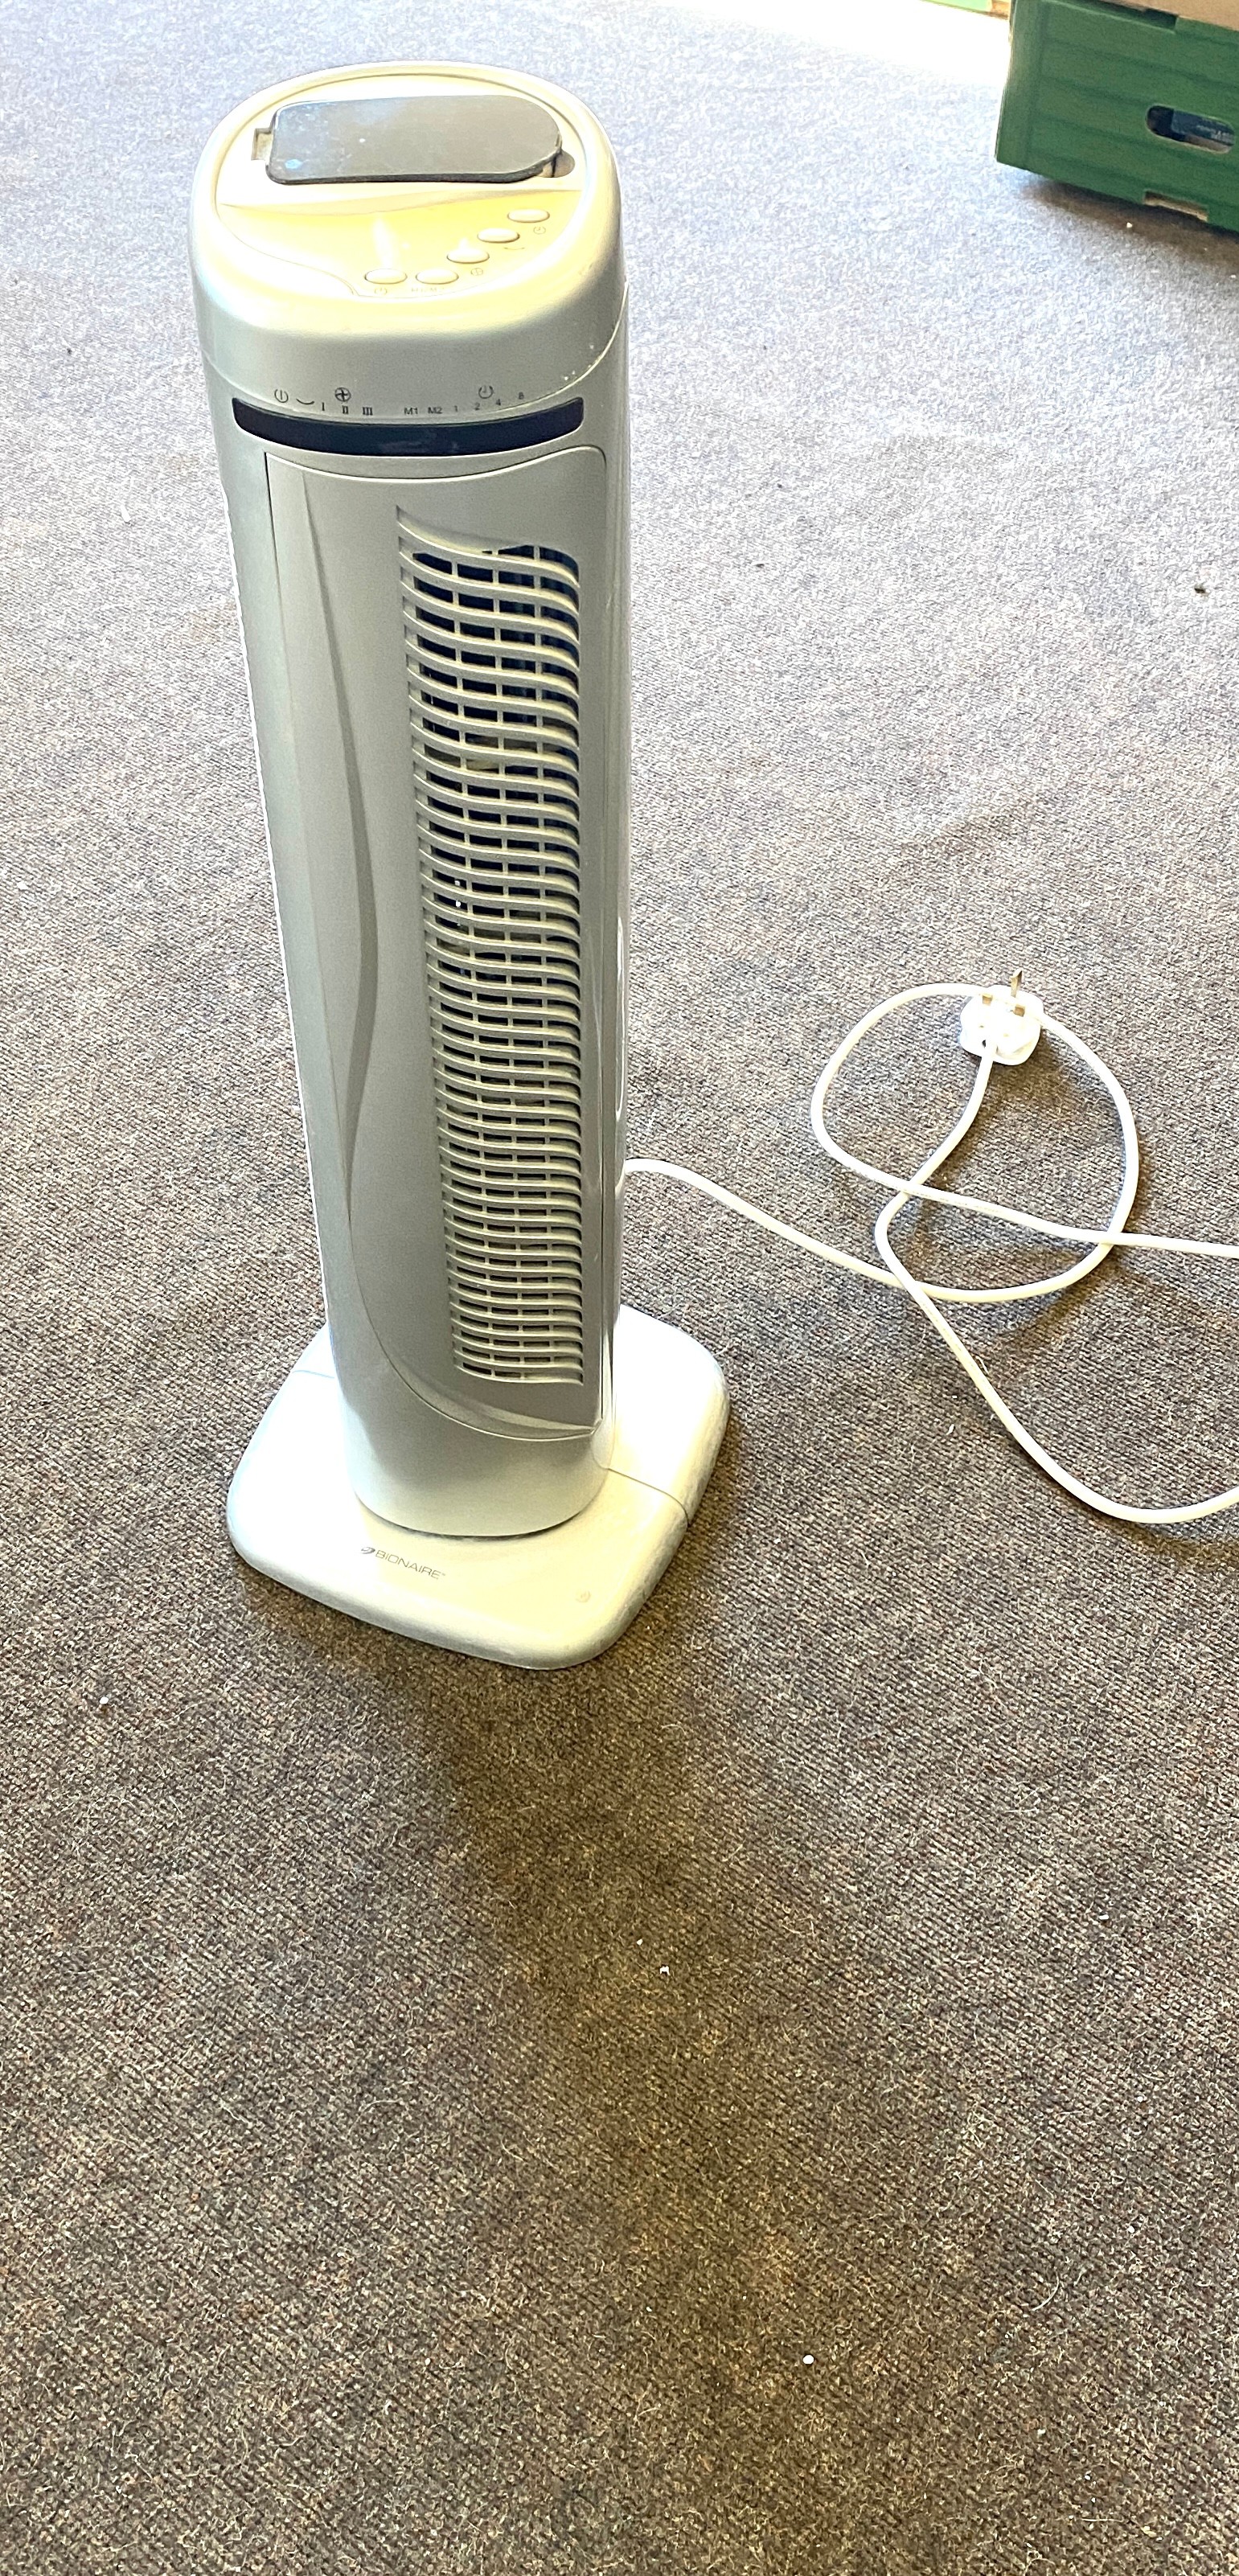 Bionaire tower fan with remote control working order